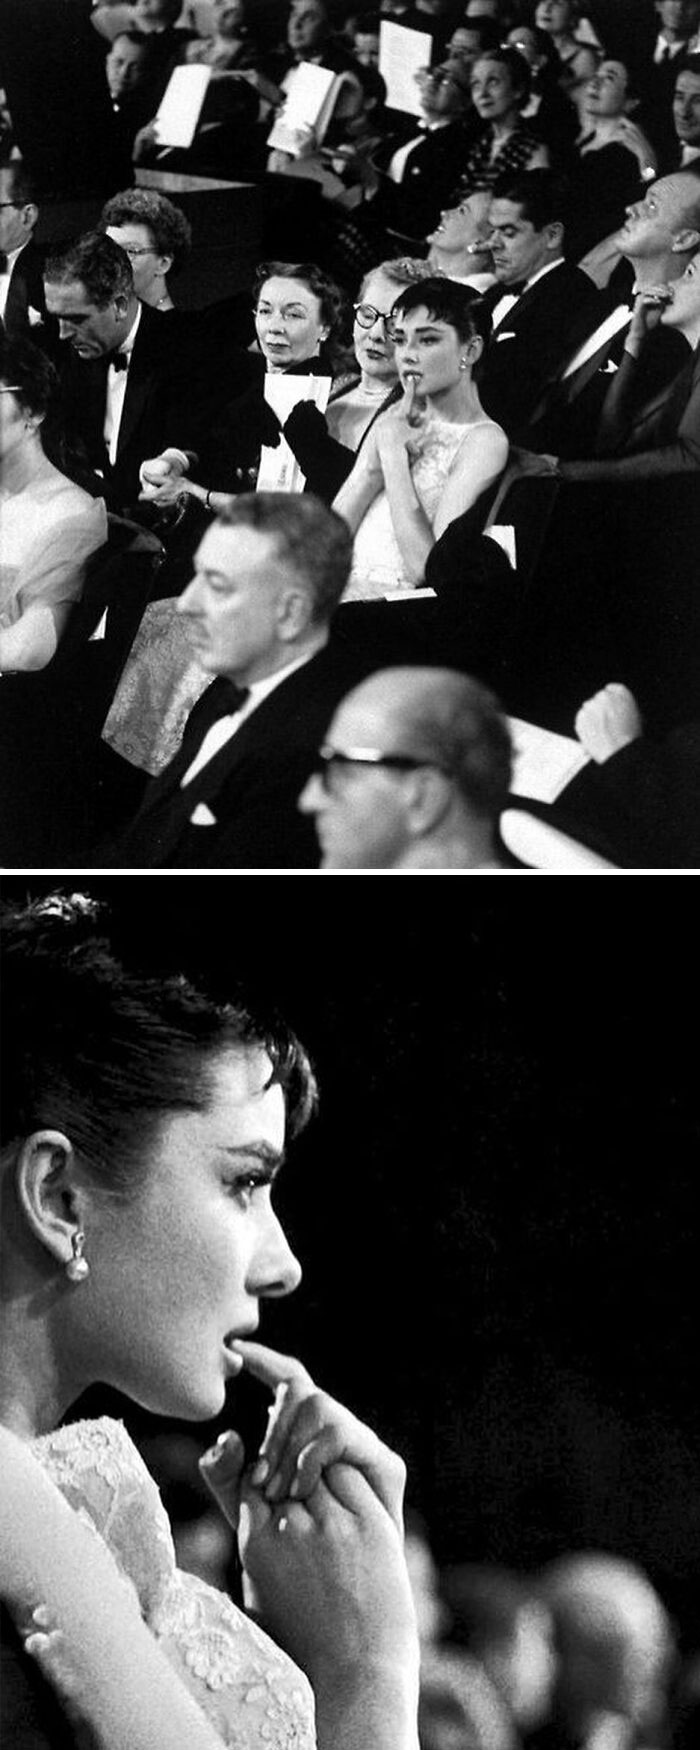 Audrey Hepburn Nervously Awaiting The Announcement For Best Actress At The 26th Academy Awards Ceremony, 1954